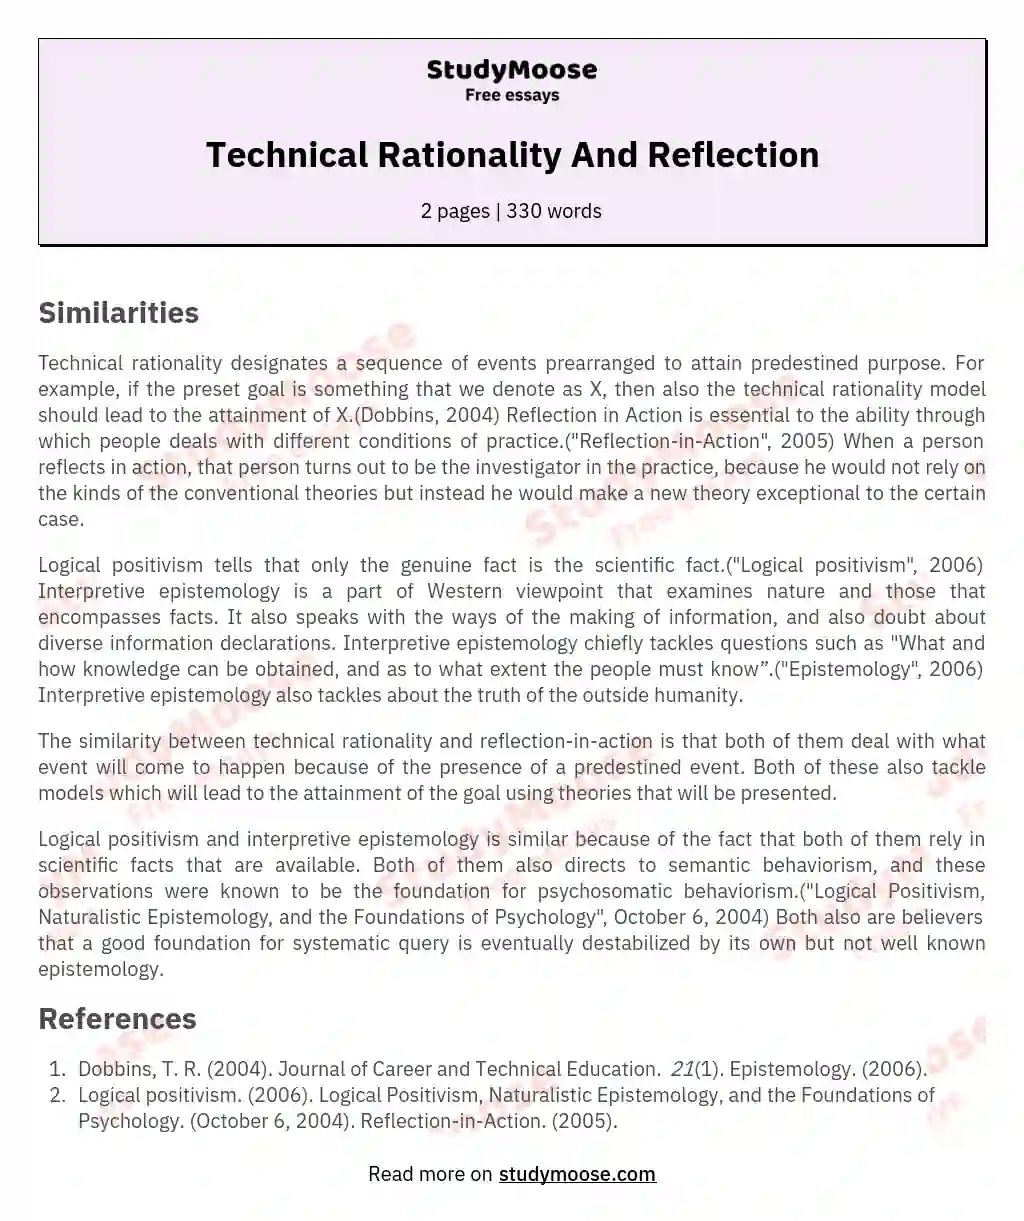 Technical Rationality And Reflection essay